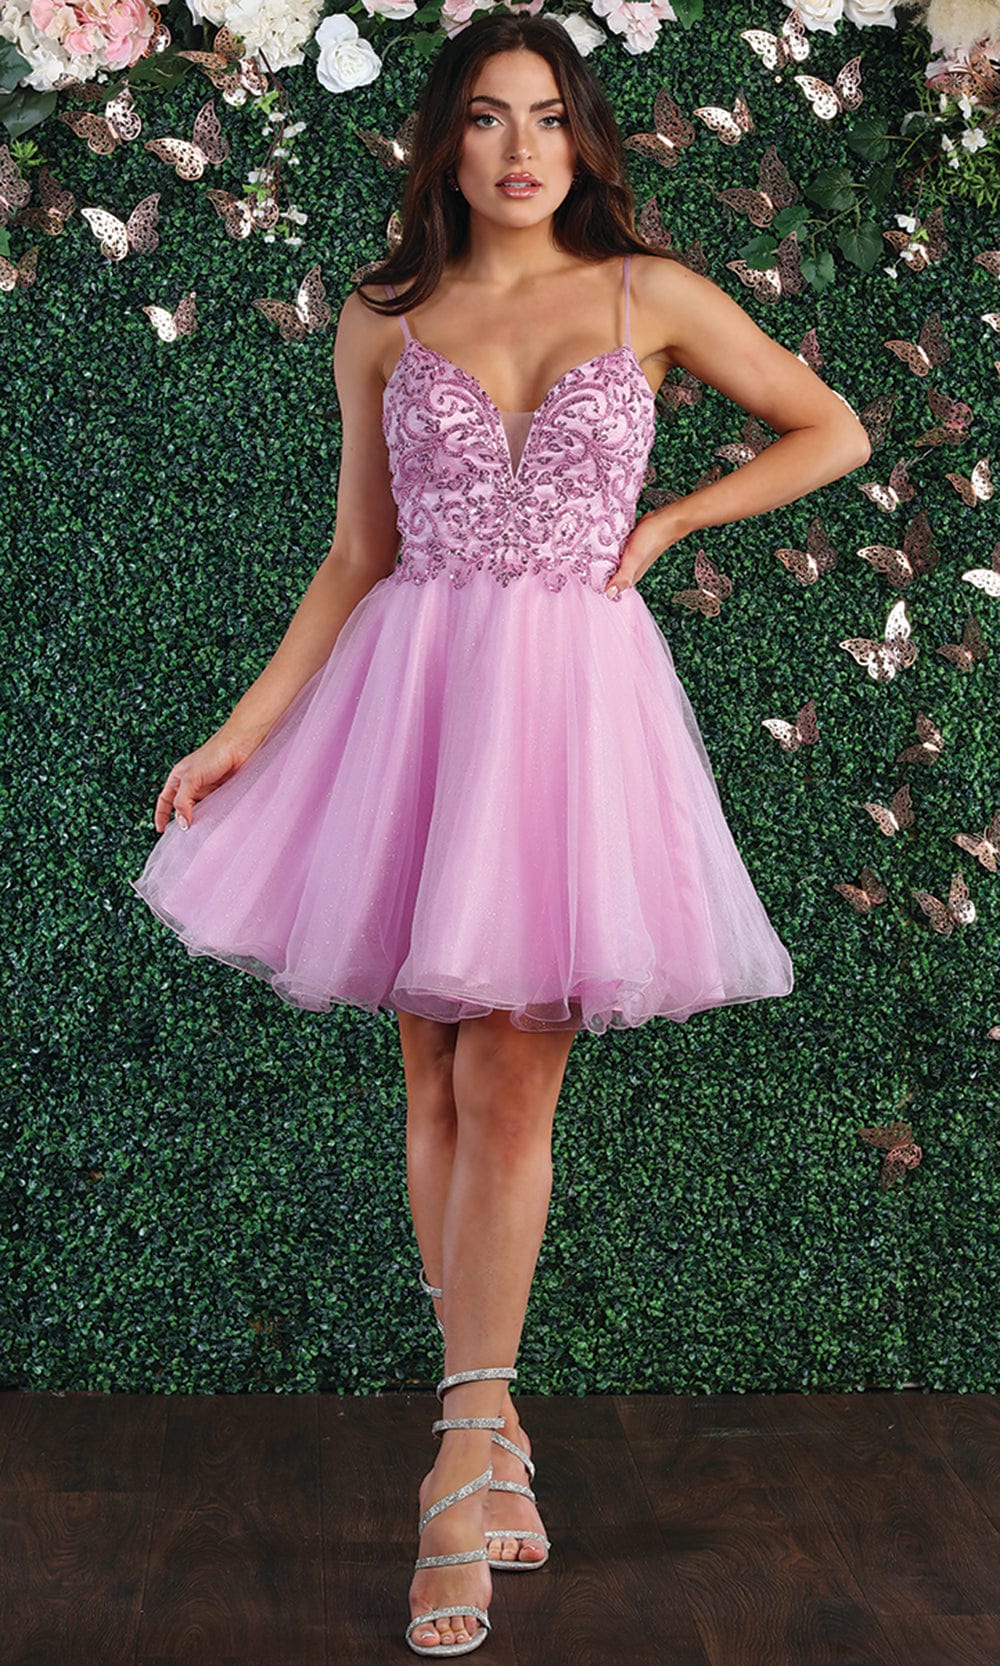 May Queen MQ1888 - Beaded Bodice Cocktail Dress Special Occasion Dress 2 / Pink